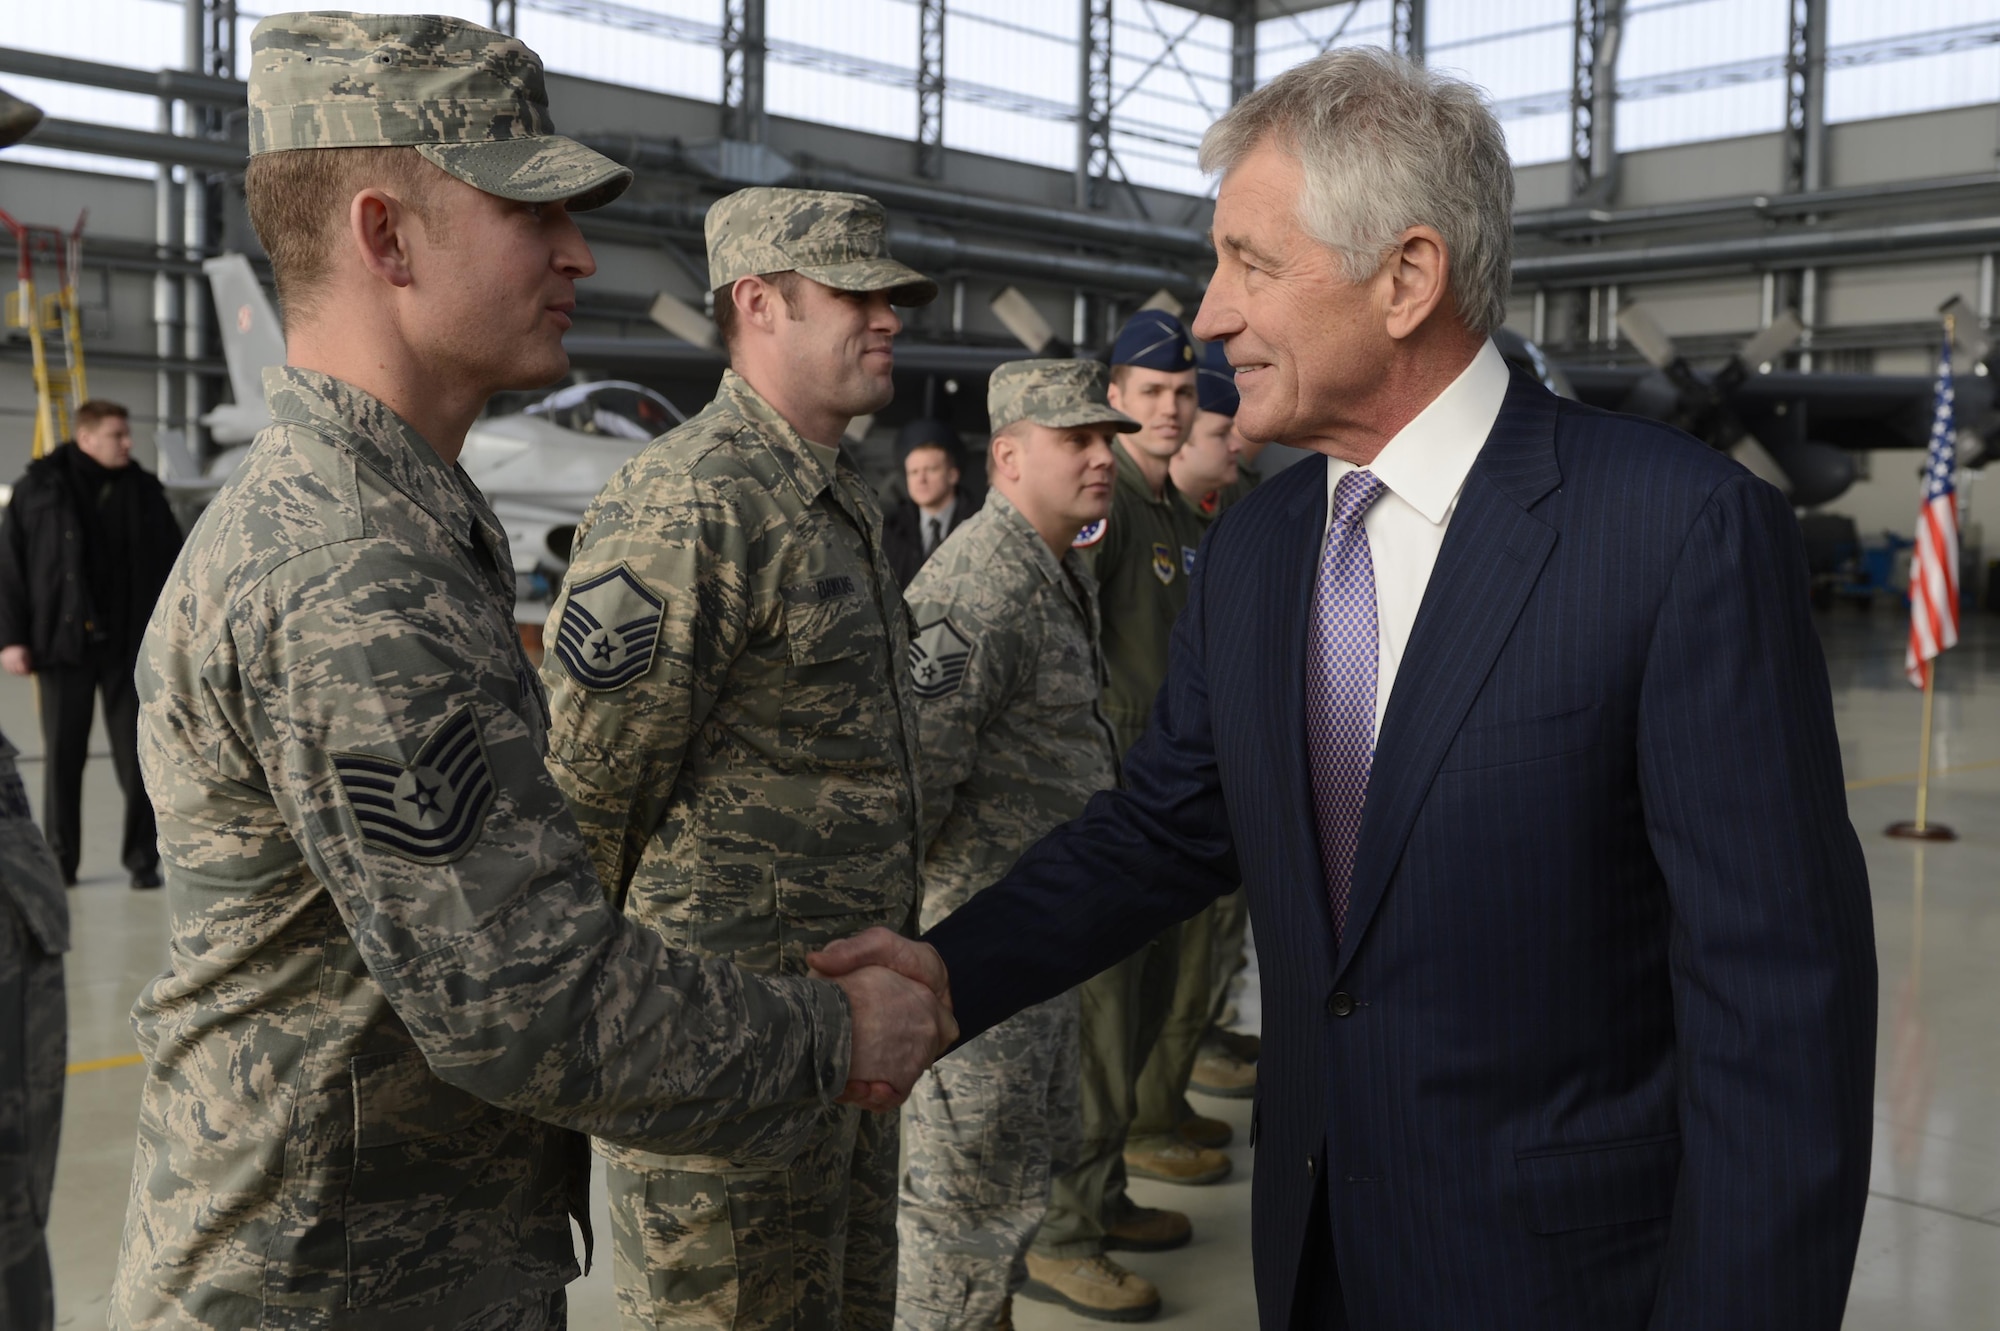 Tech. Sgt. Brian Williams receives a handshake from Secretary of Defense Chuck Hagel Jan. 31, 2014, at Powidz Air Base, Poland. The Aviation Detachment's mission supports Poland’s continued defense modernization and standardization with the U.S. and the North Atlantic Treaty Organization. Williams is the 52nd Operations Group Aviation detatchment NCO in charge of client systems  (U.S. Air Force photo/Staff Sgt. Christopher Ruano)